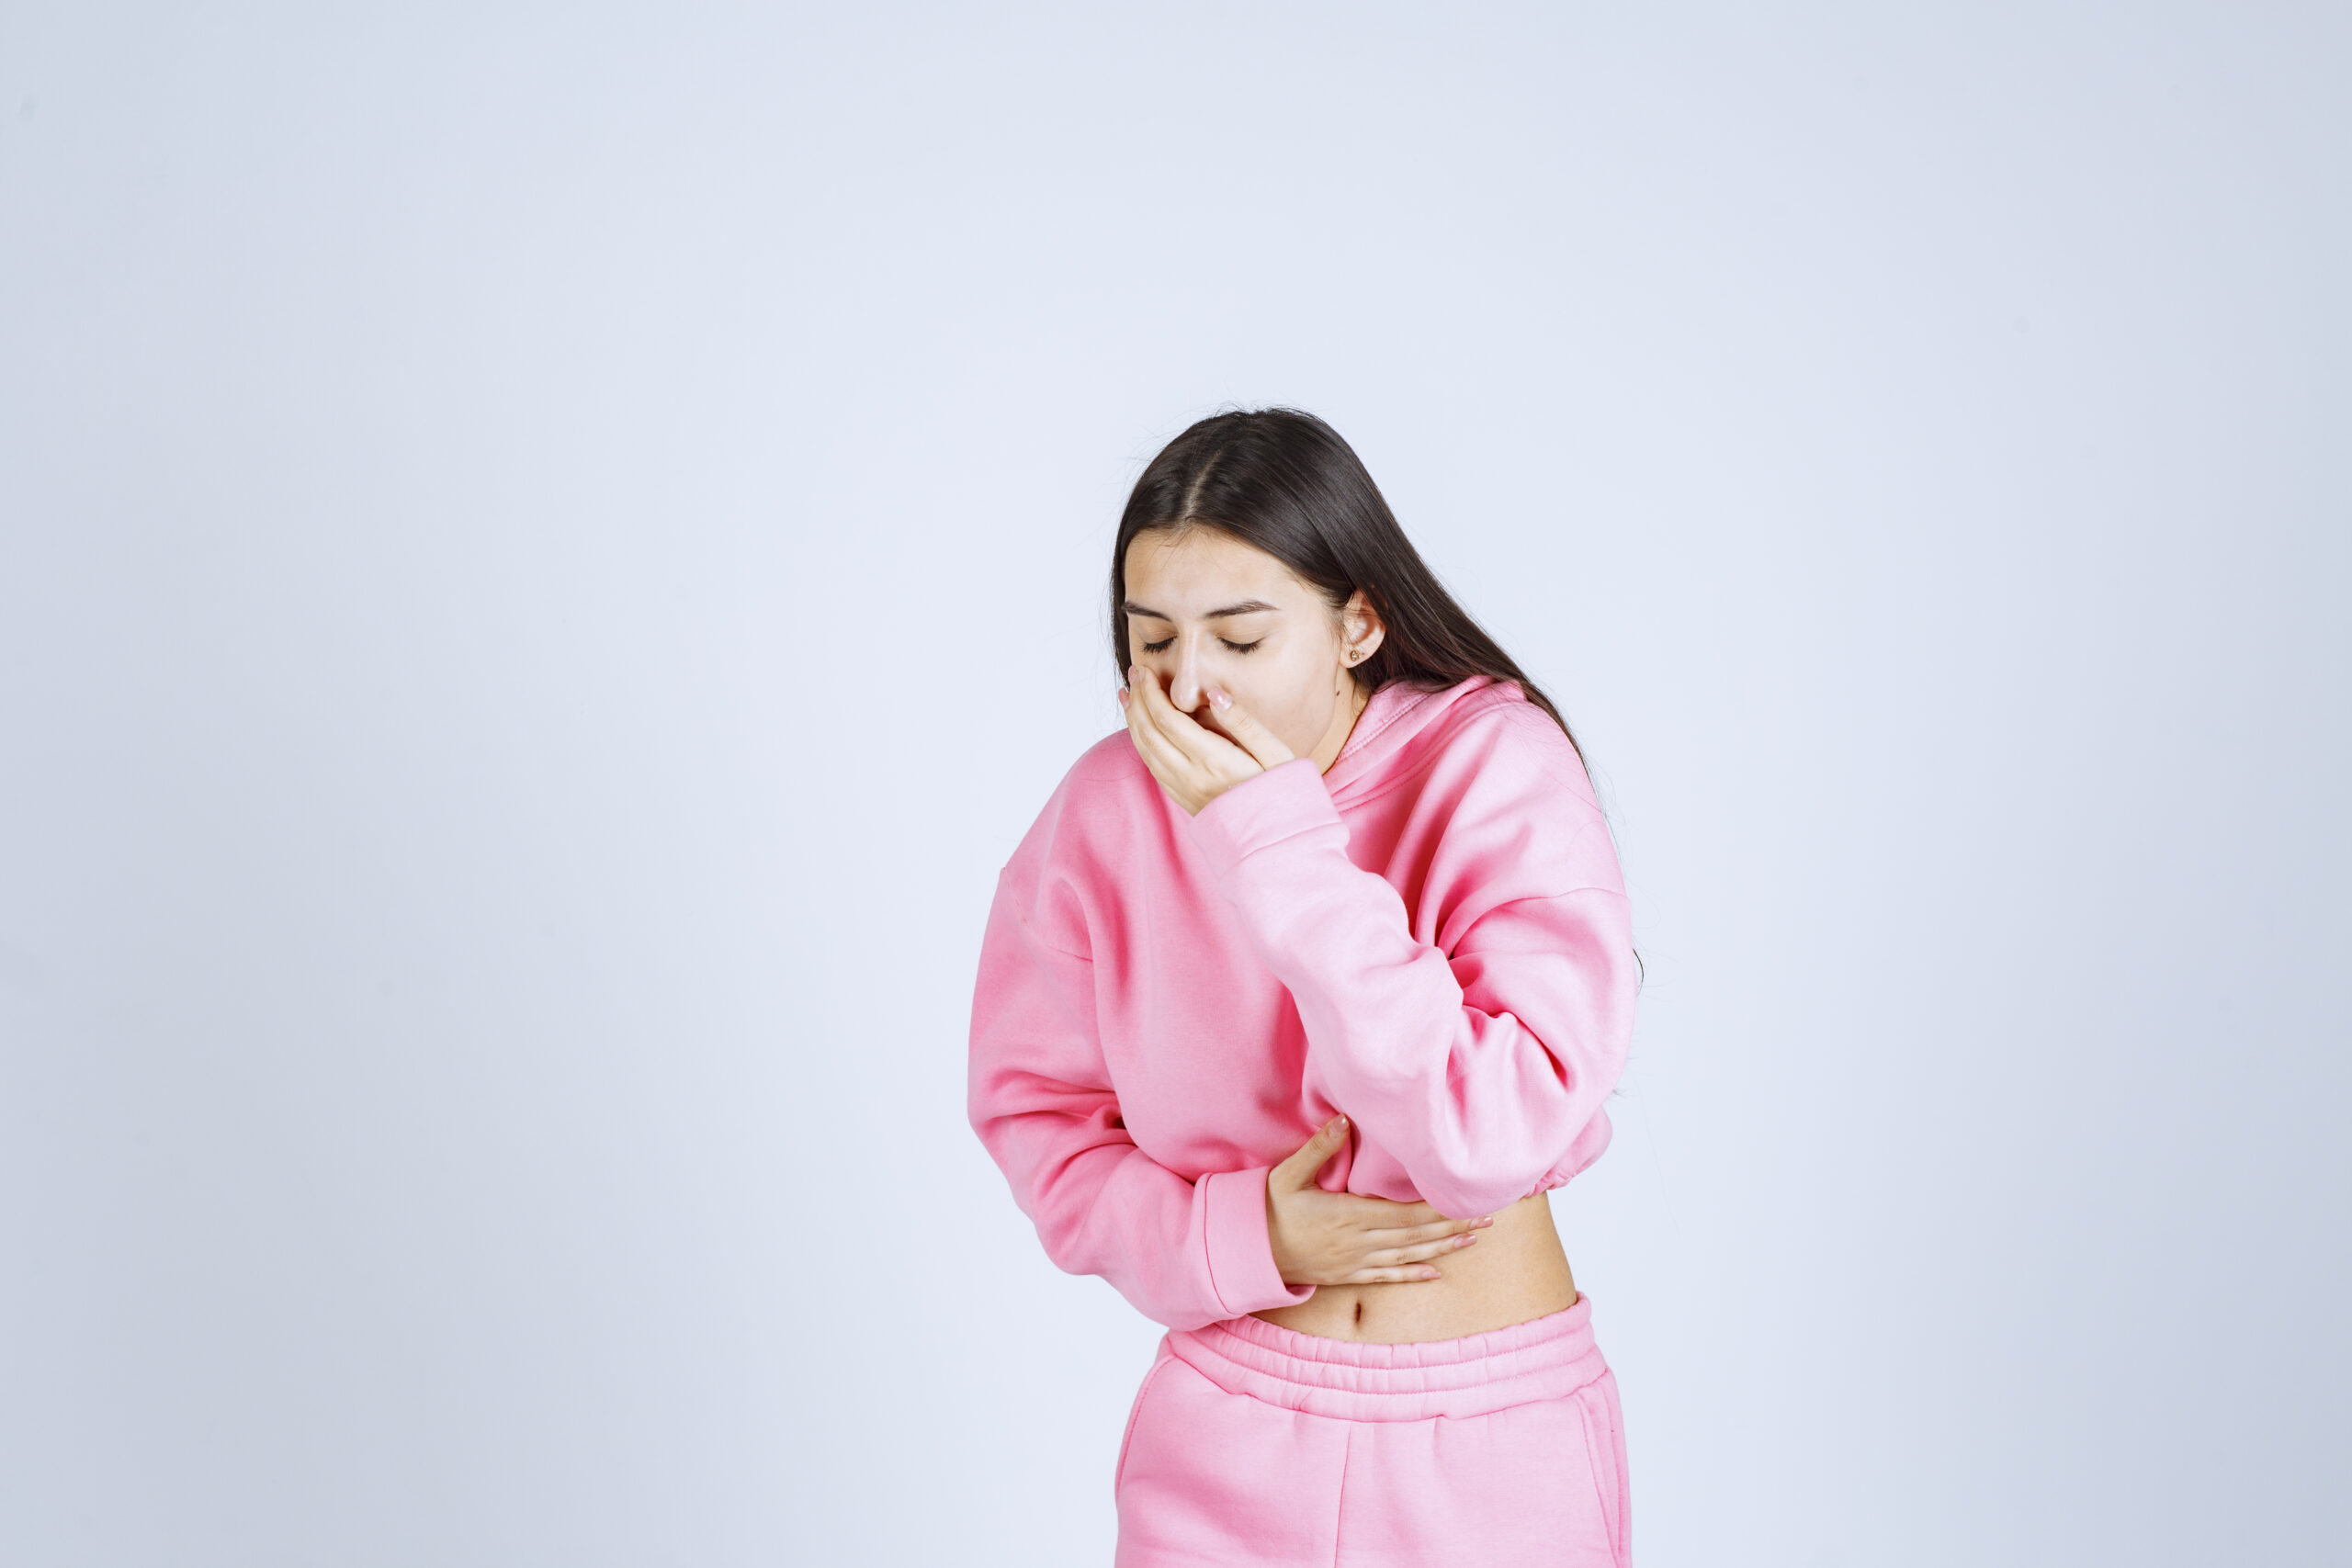 Nausea: What Is, Causes, Diagnostic Tests